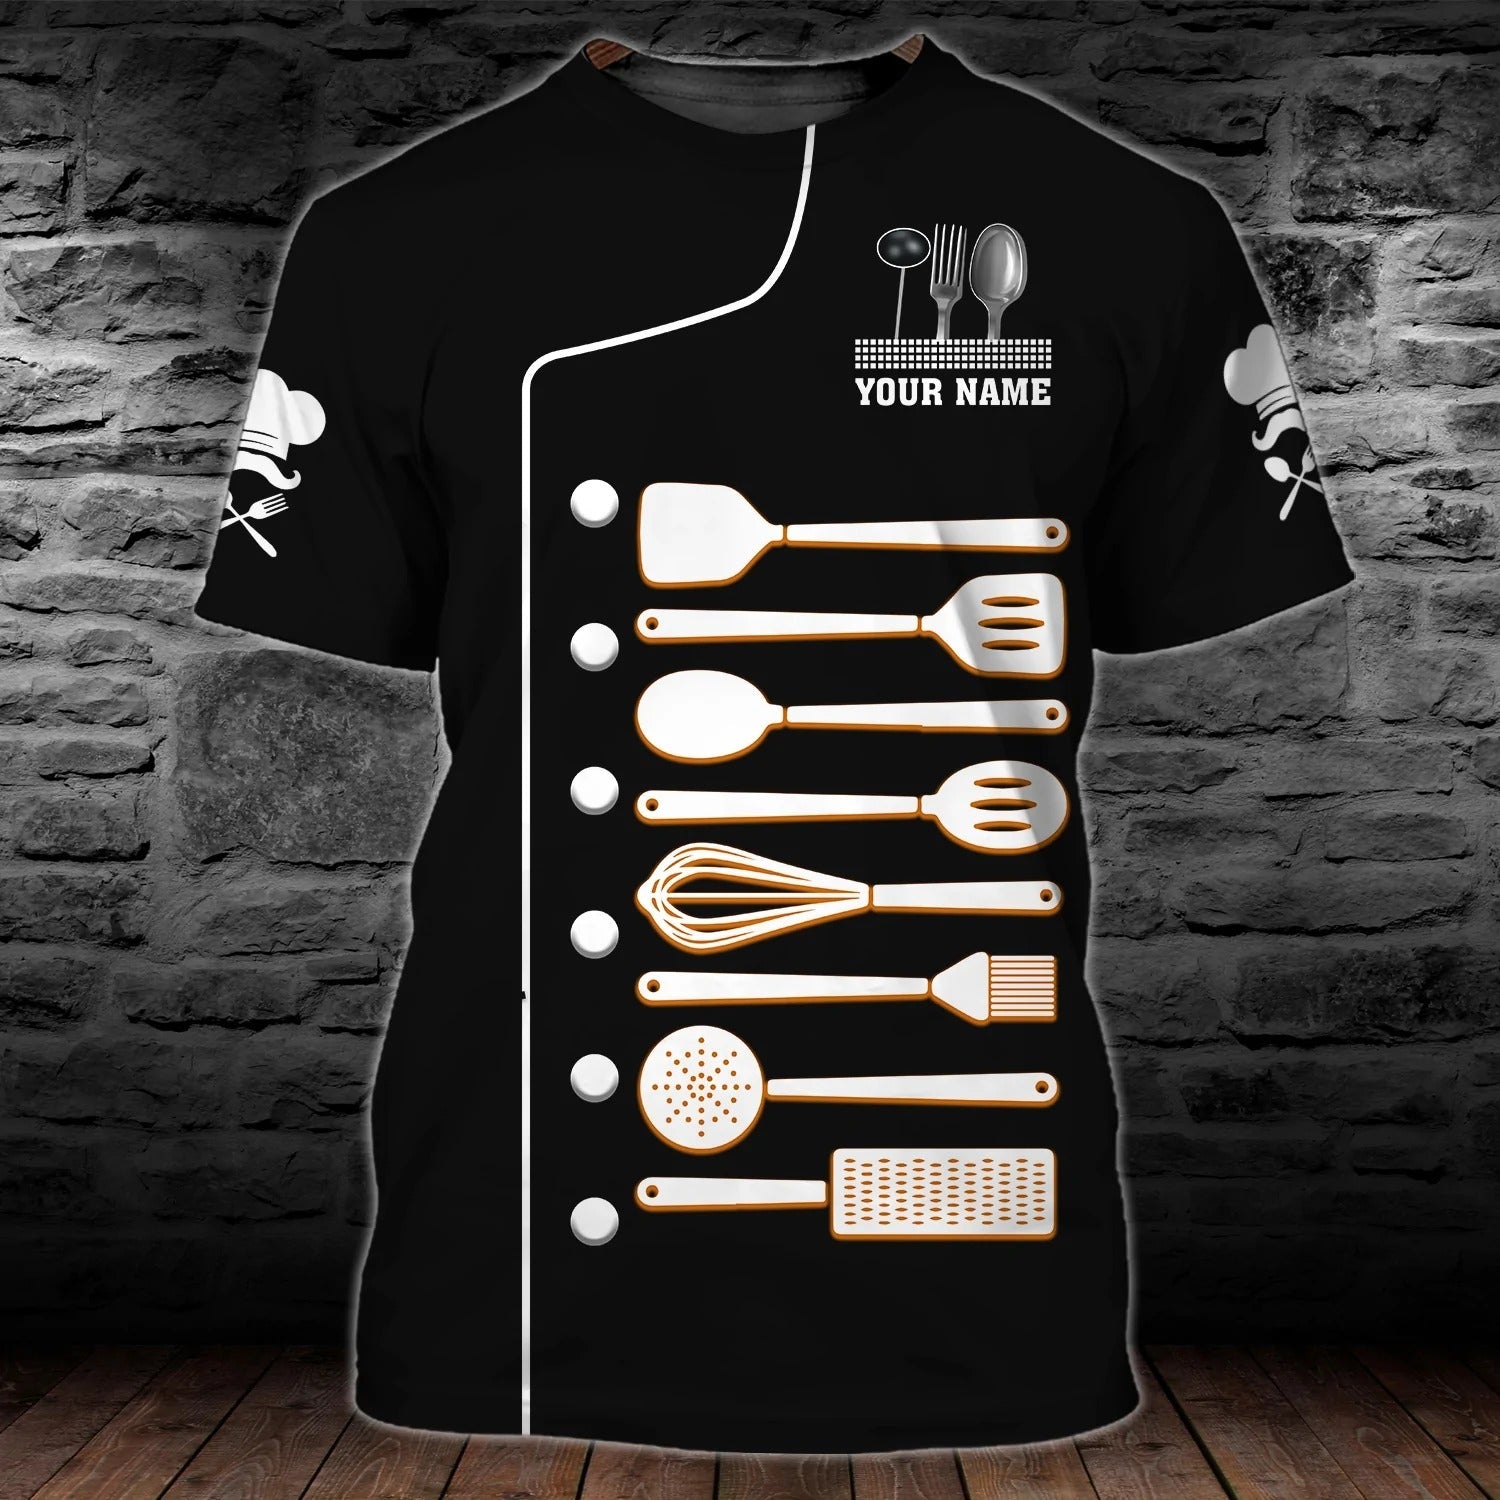 Custom Name Funny Shirt For A Chef/ Cooking Equipment T Shirt/ Master Chef Gift/ Chef Shirt